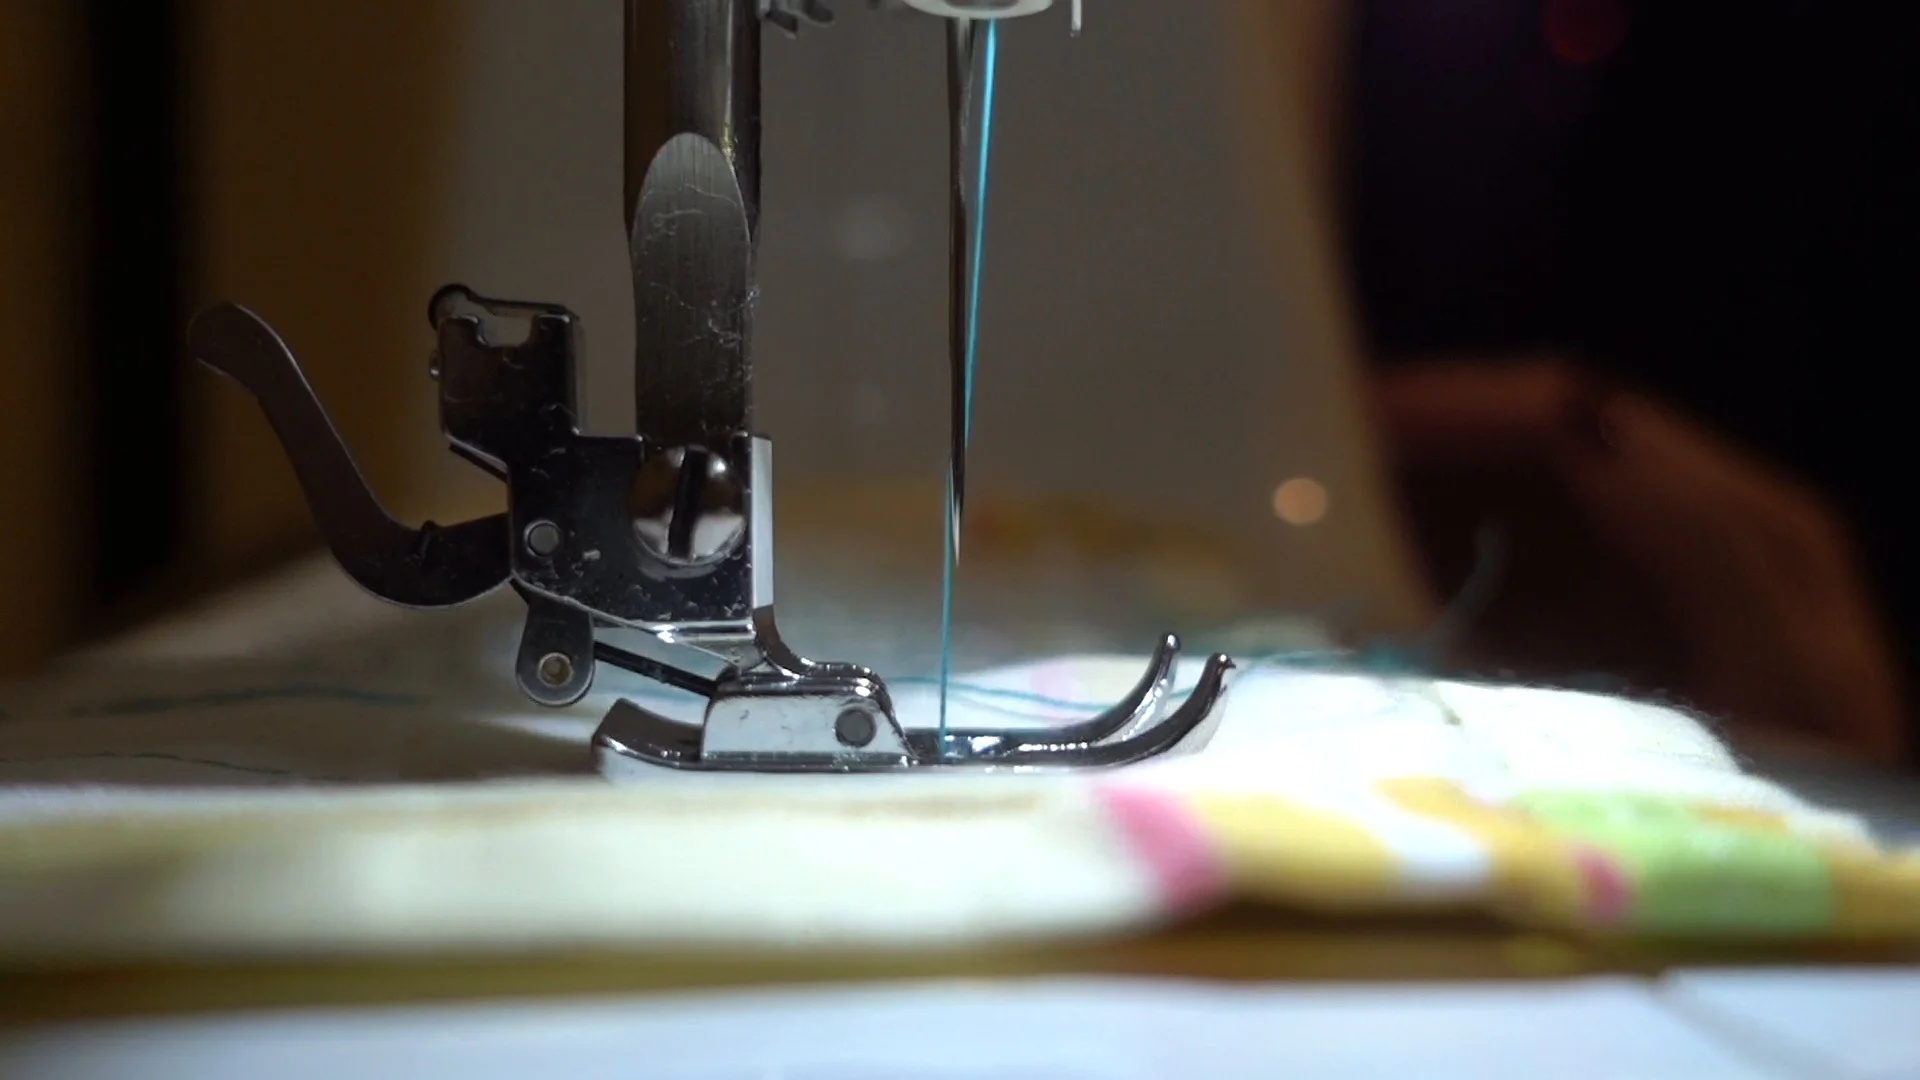 Sewing Machine Background Video | Stock Video | Pond5